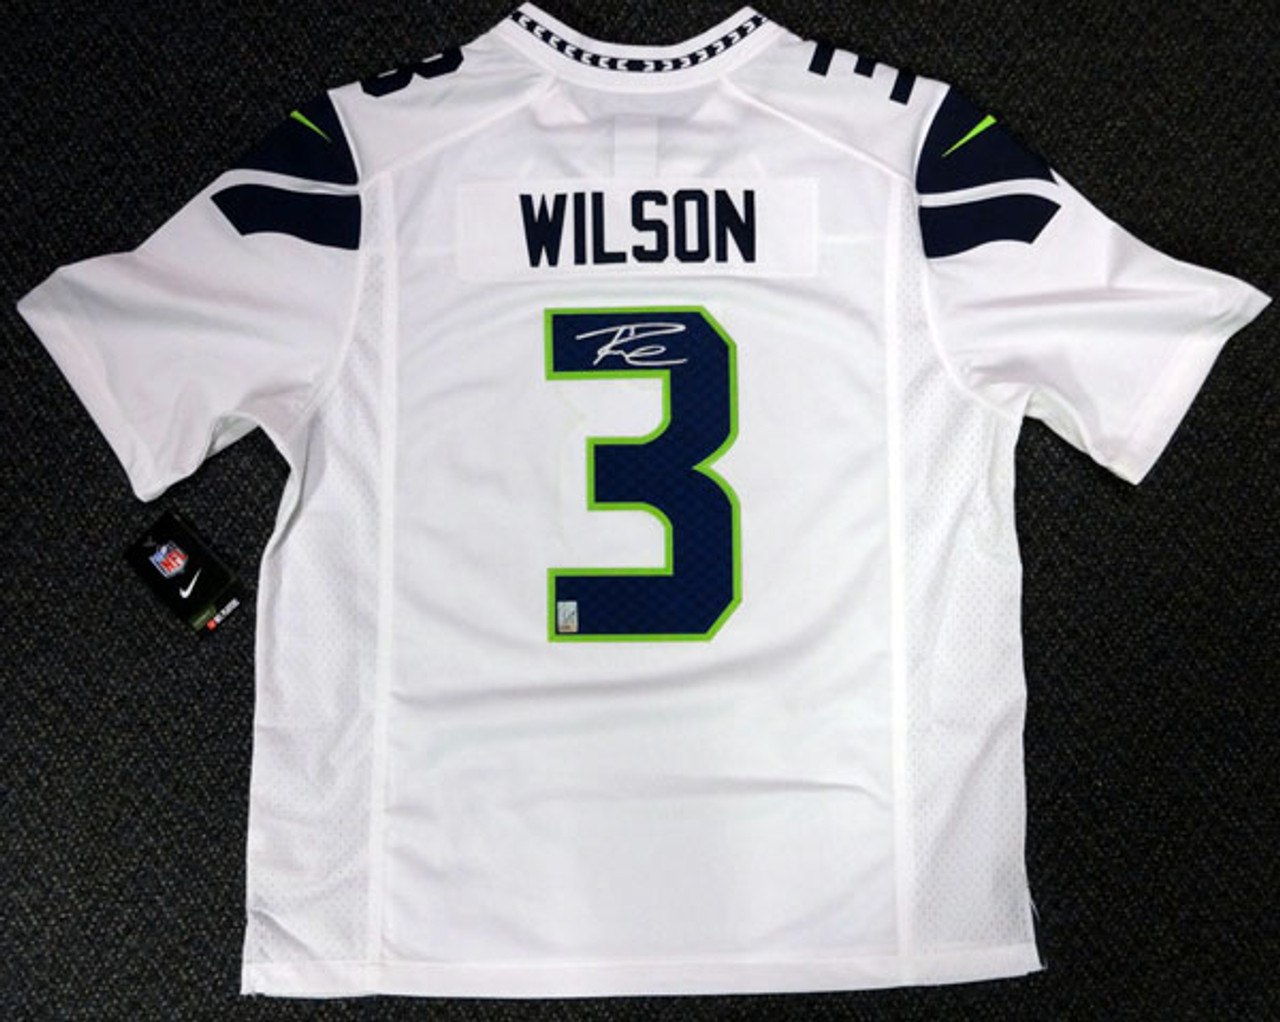 Russell Wilson Autographed Jersey - Blue Nike Elite Size 52 RW